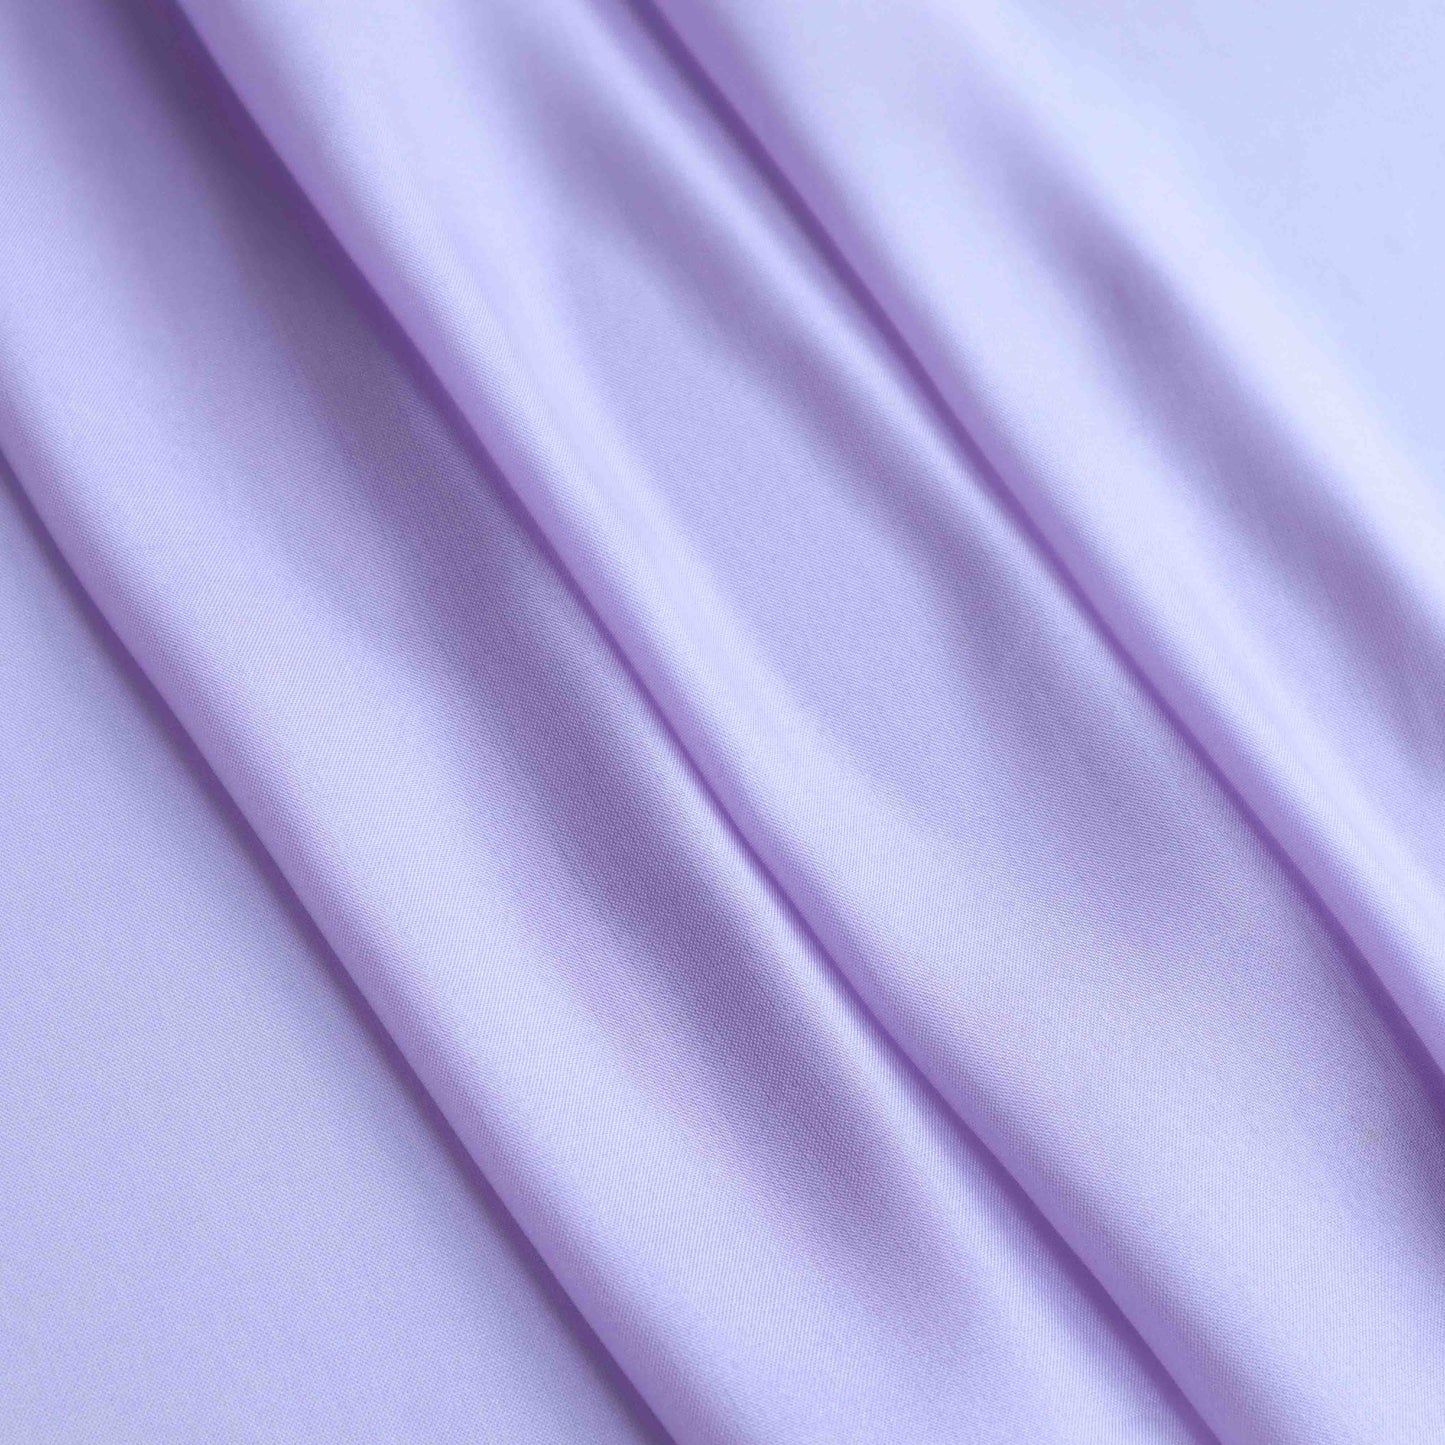 A lightweight Habutai lining made from Silk in Lavender Frost. This ultralight silk lining comes with an incredibly smooth and cool hand feel.